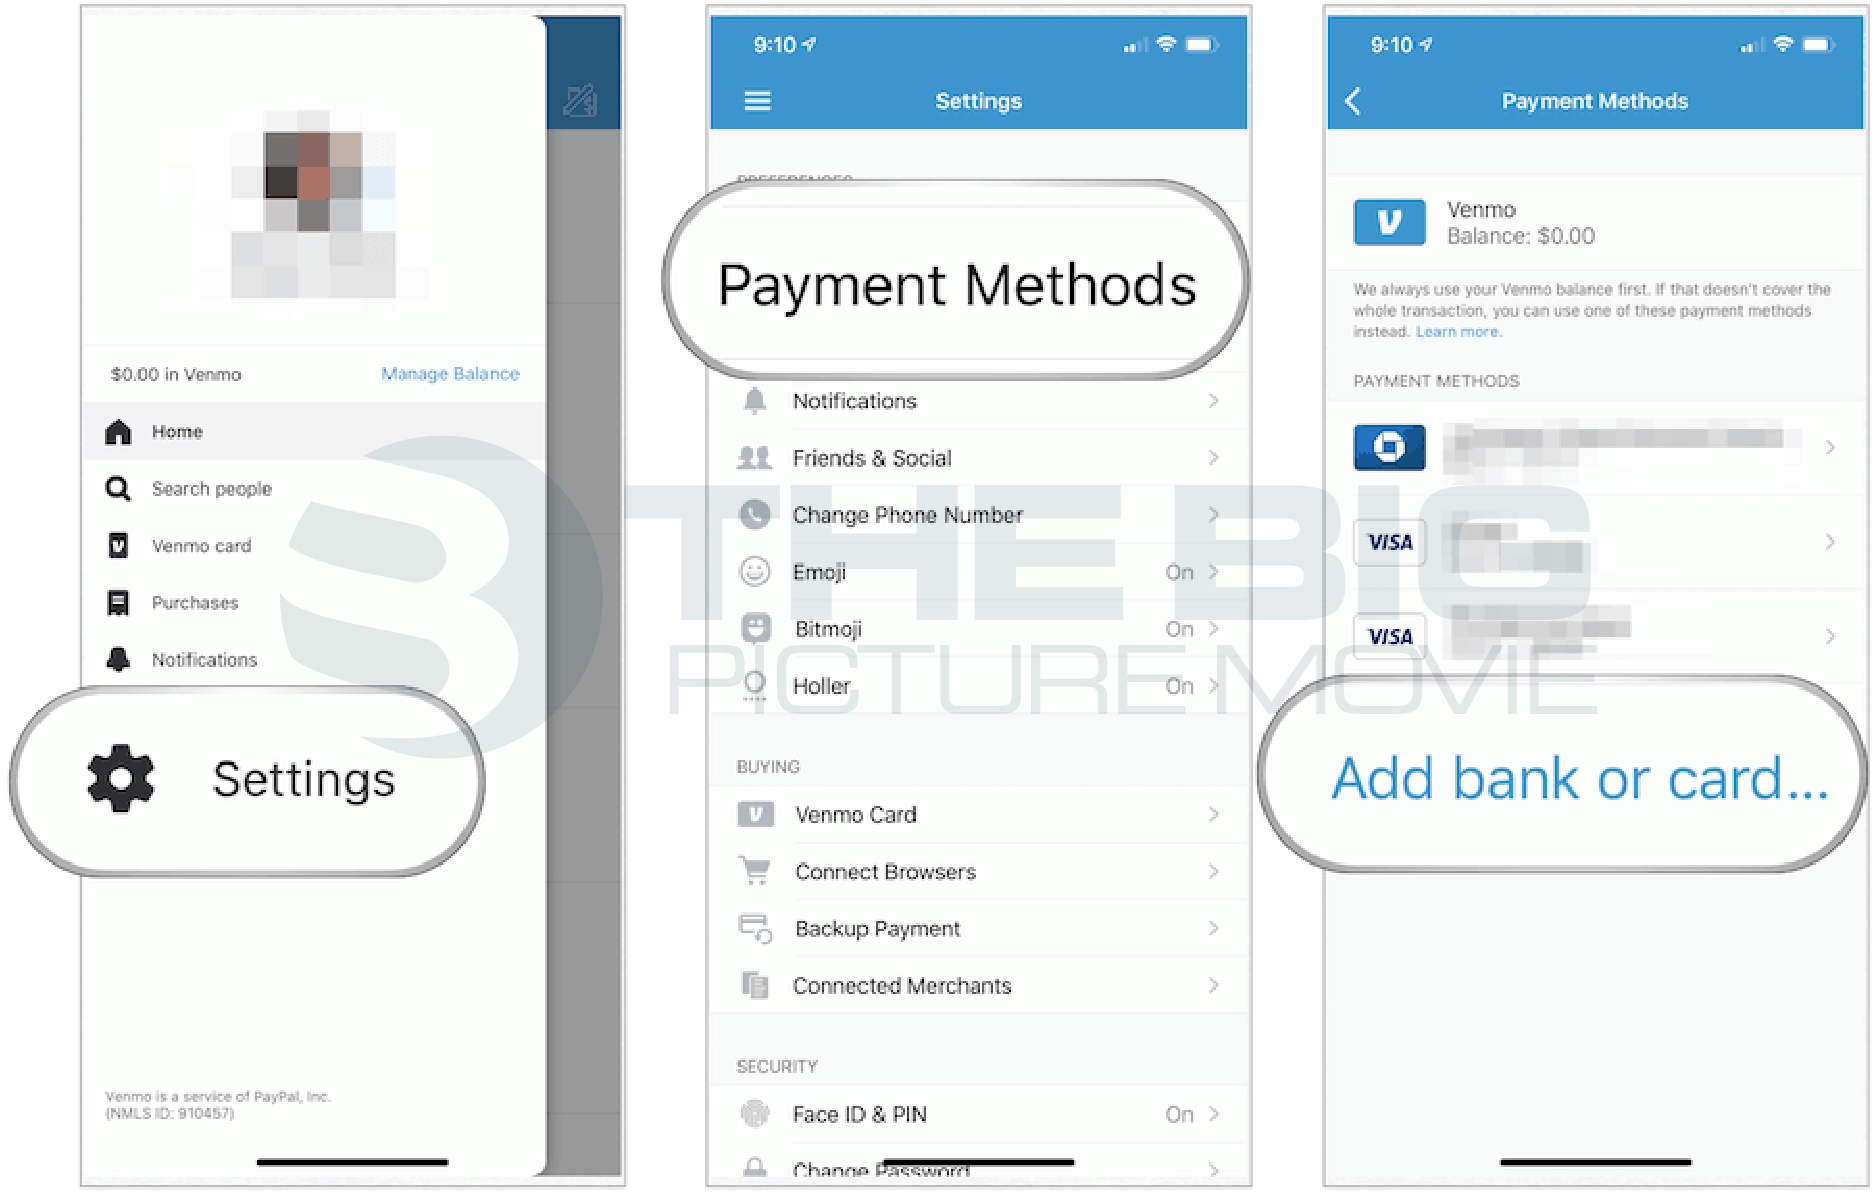 steps to link your bank account to the Venmo app.